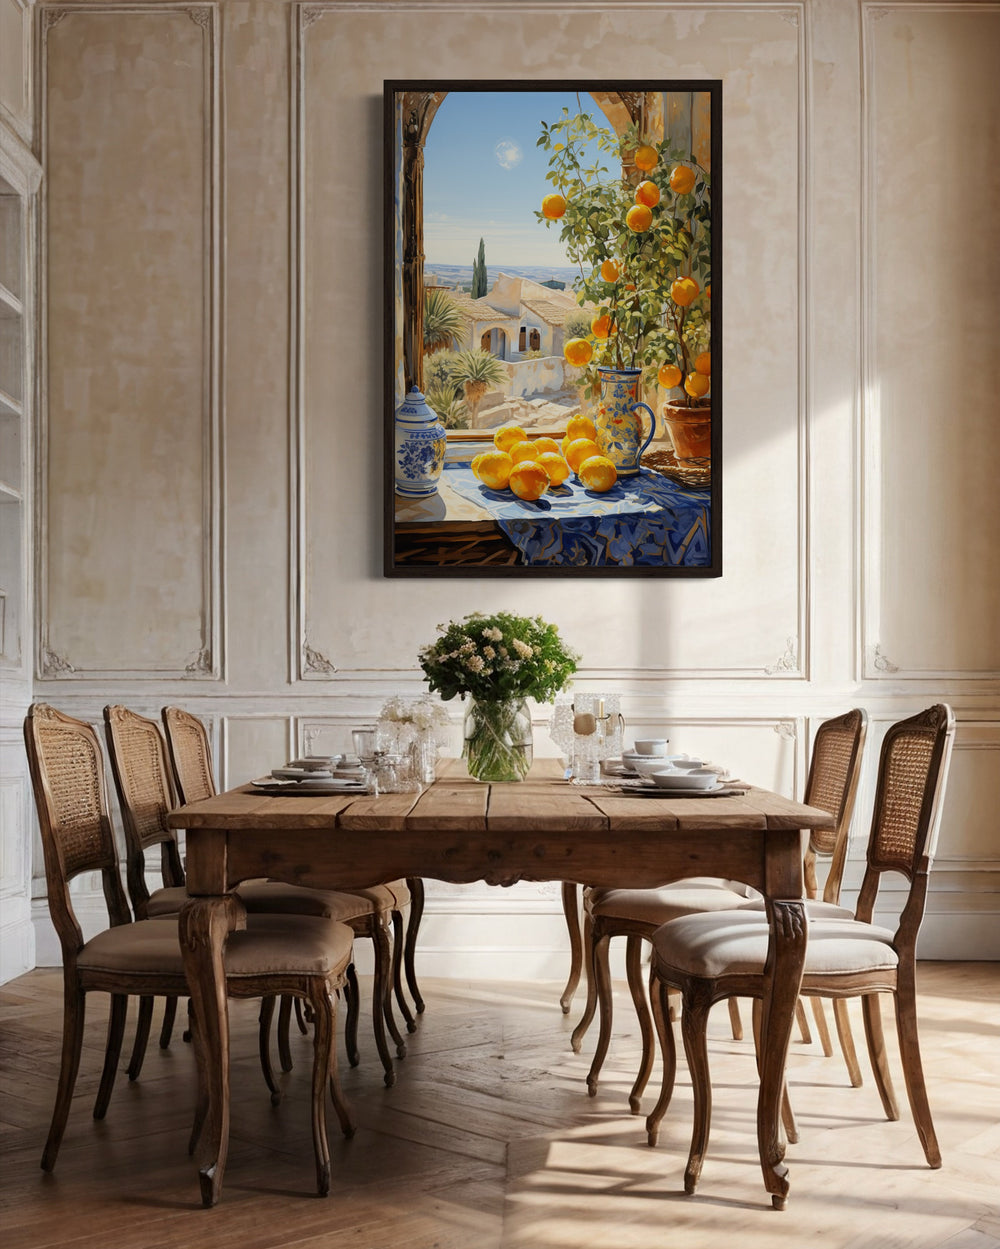 Mediterranean Window View With Oranges Wall Art in dining room